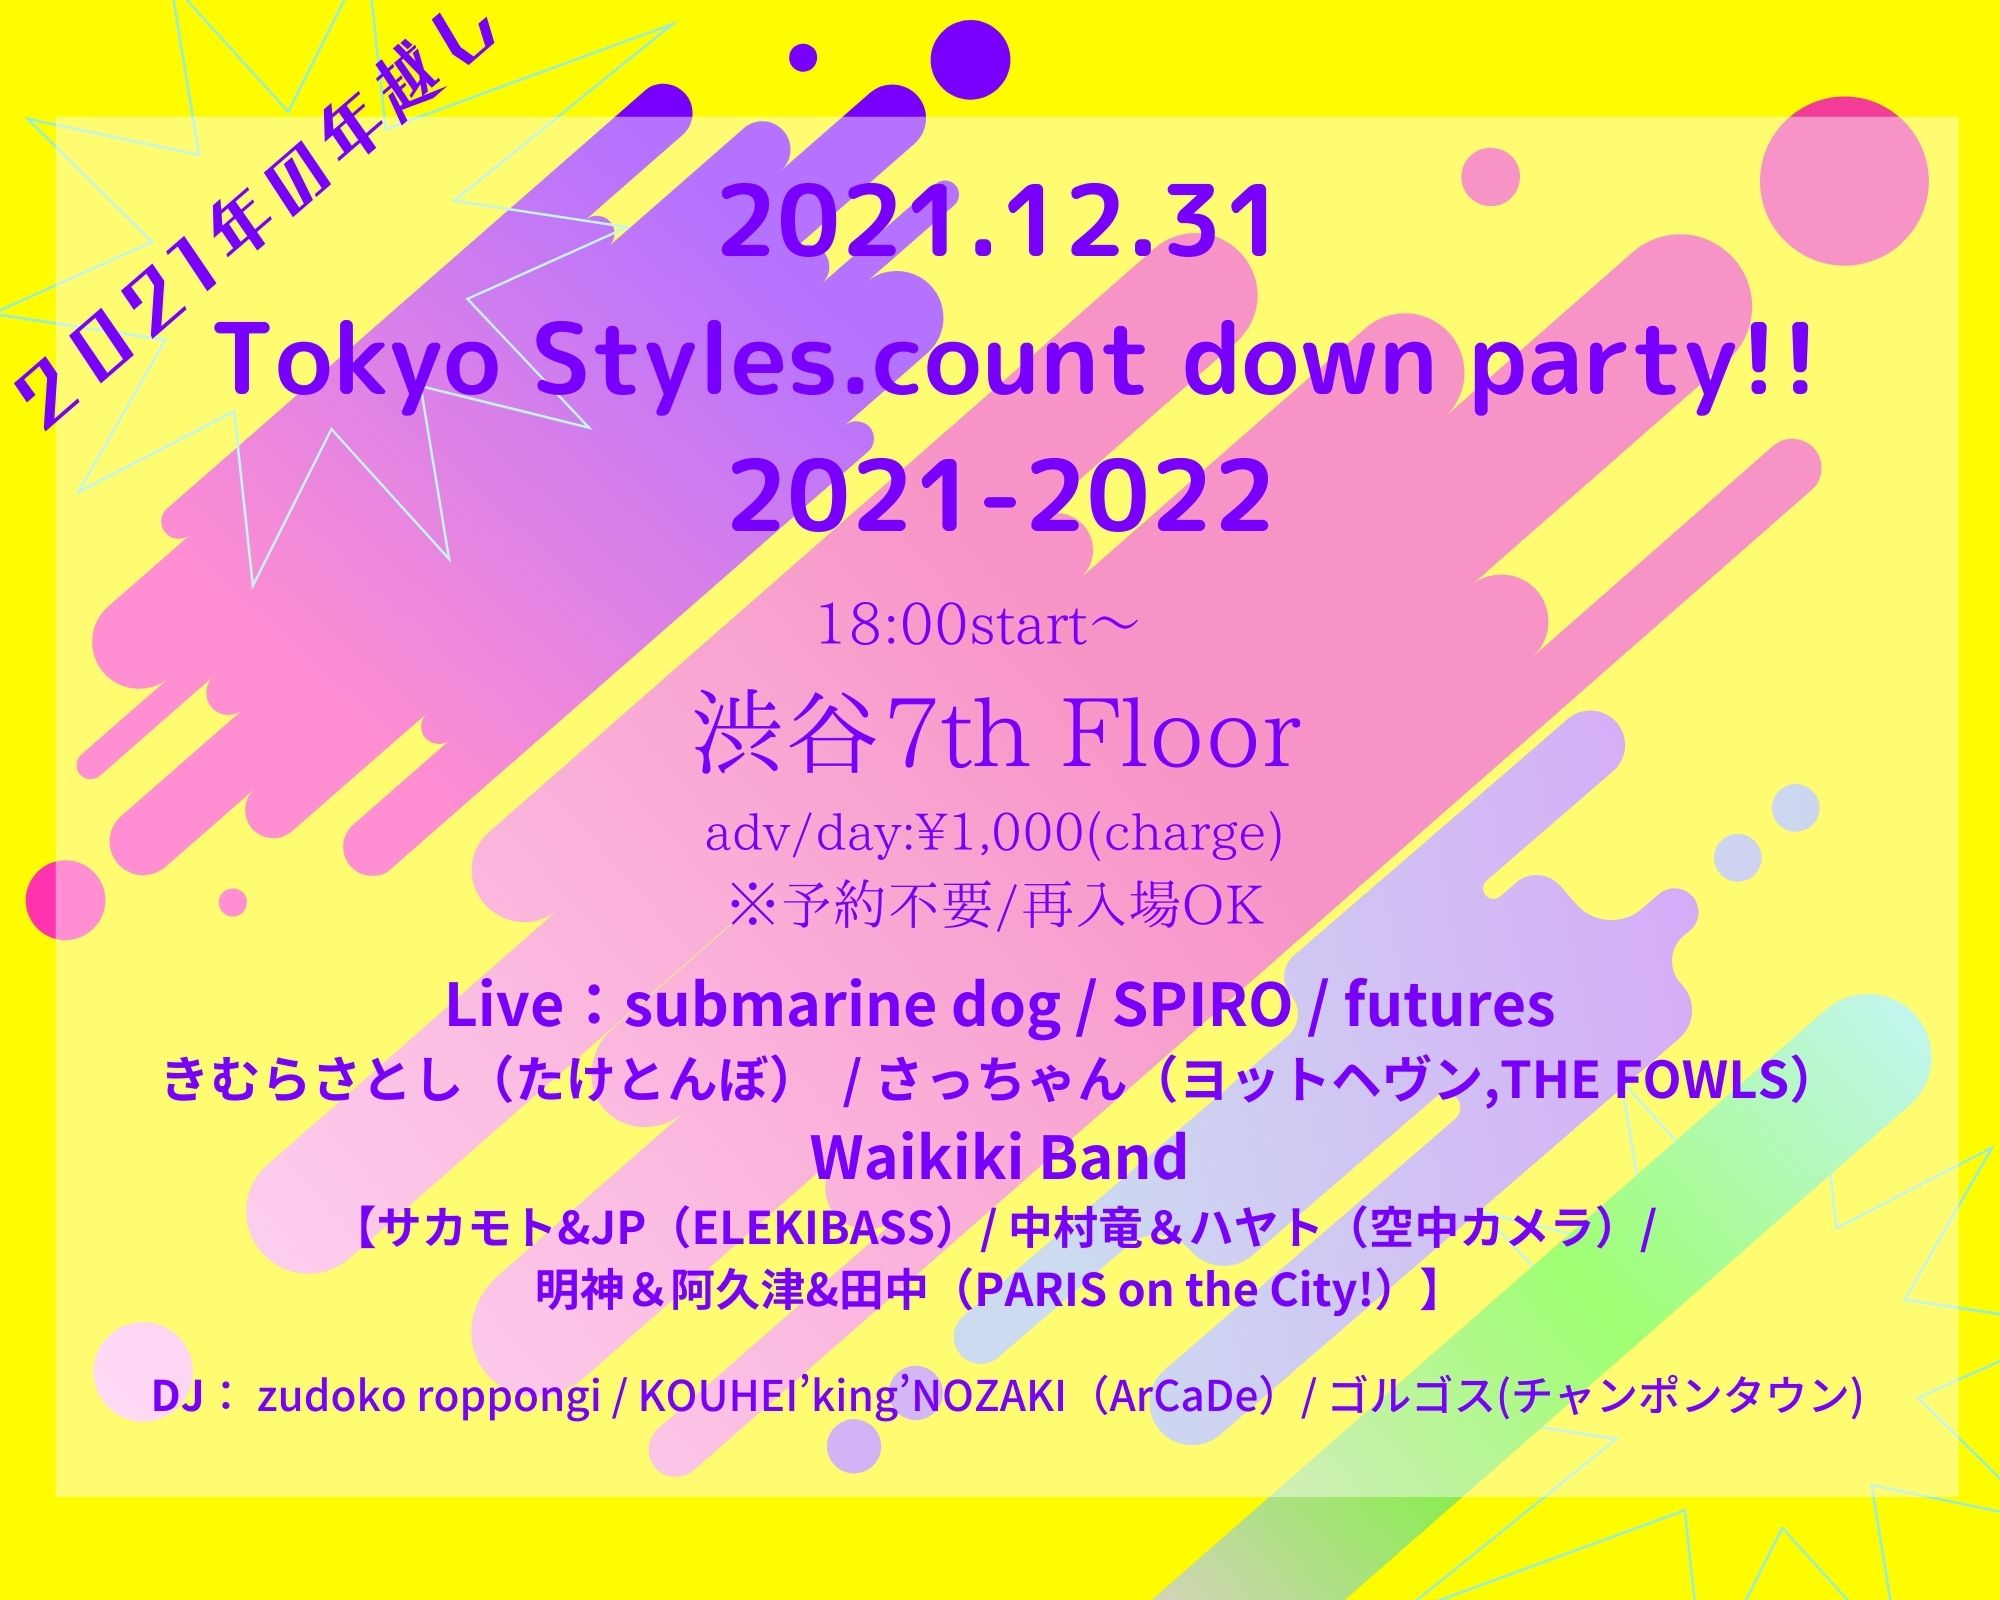 “Tokyo Styles.〜count down party!!2021-2022”